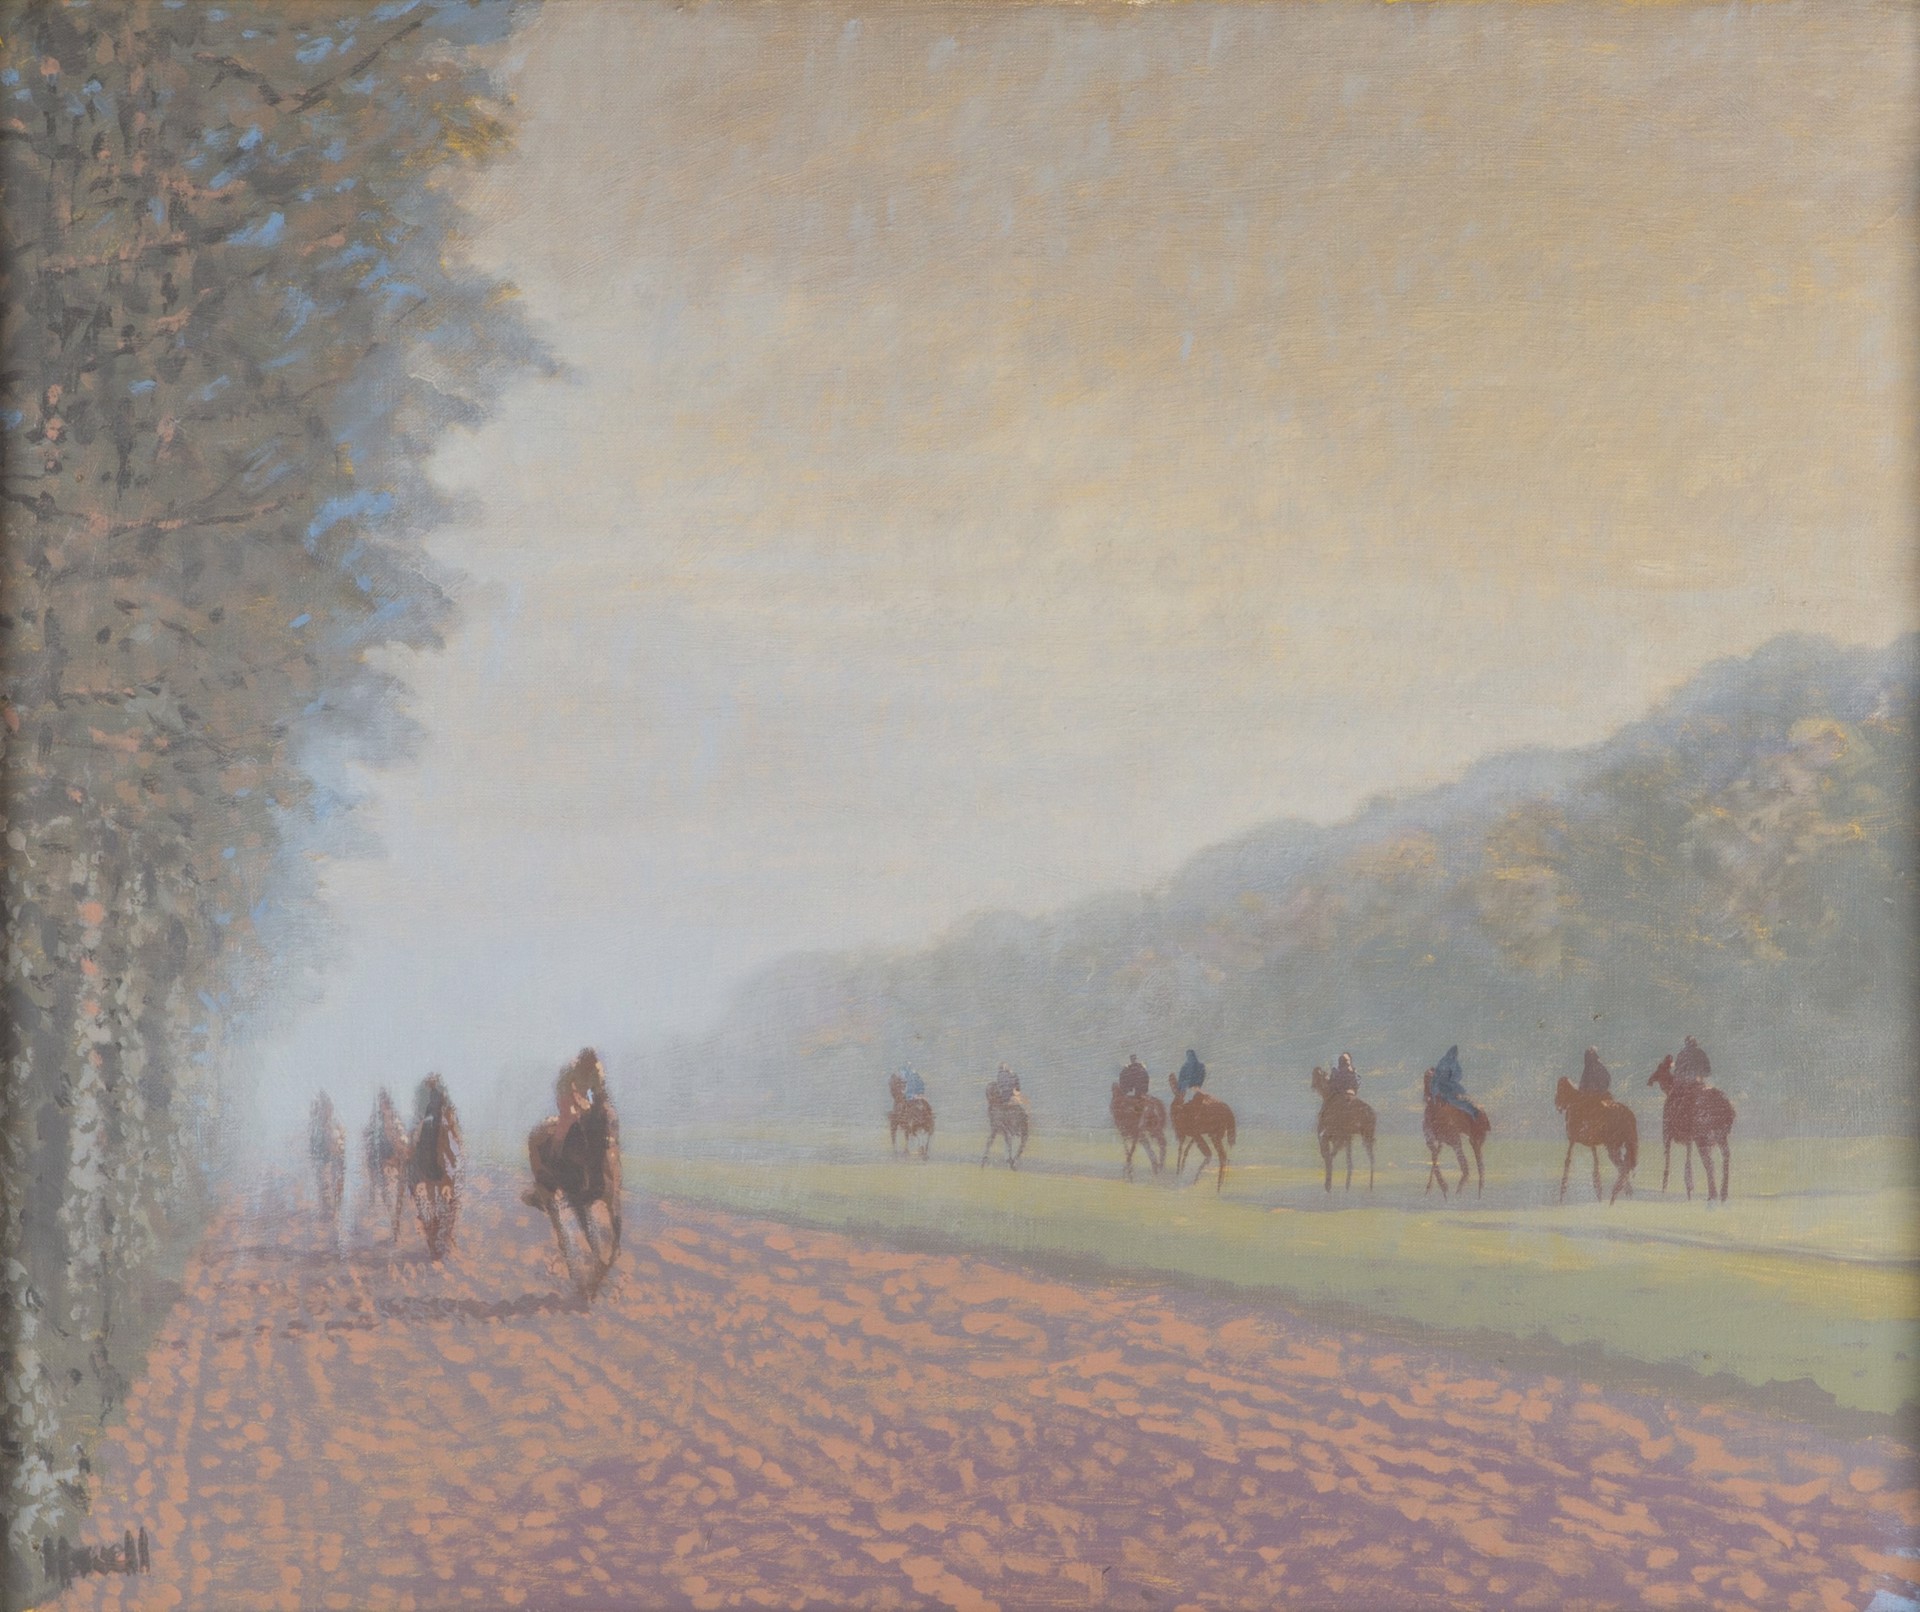 On the Gallops by Peter Howell